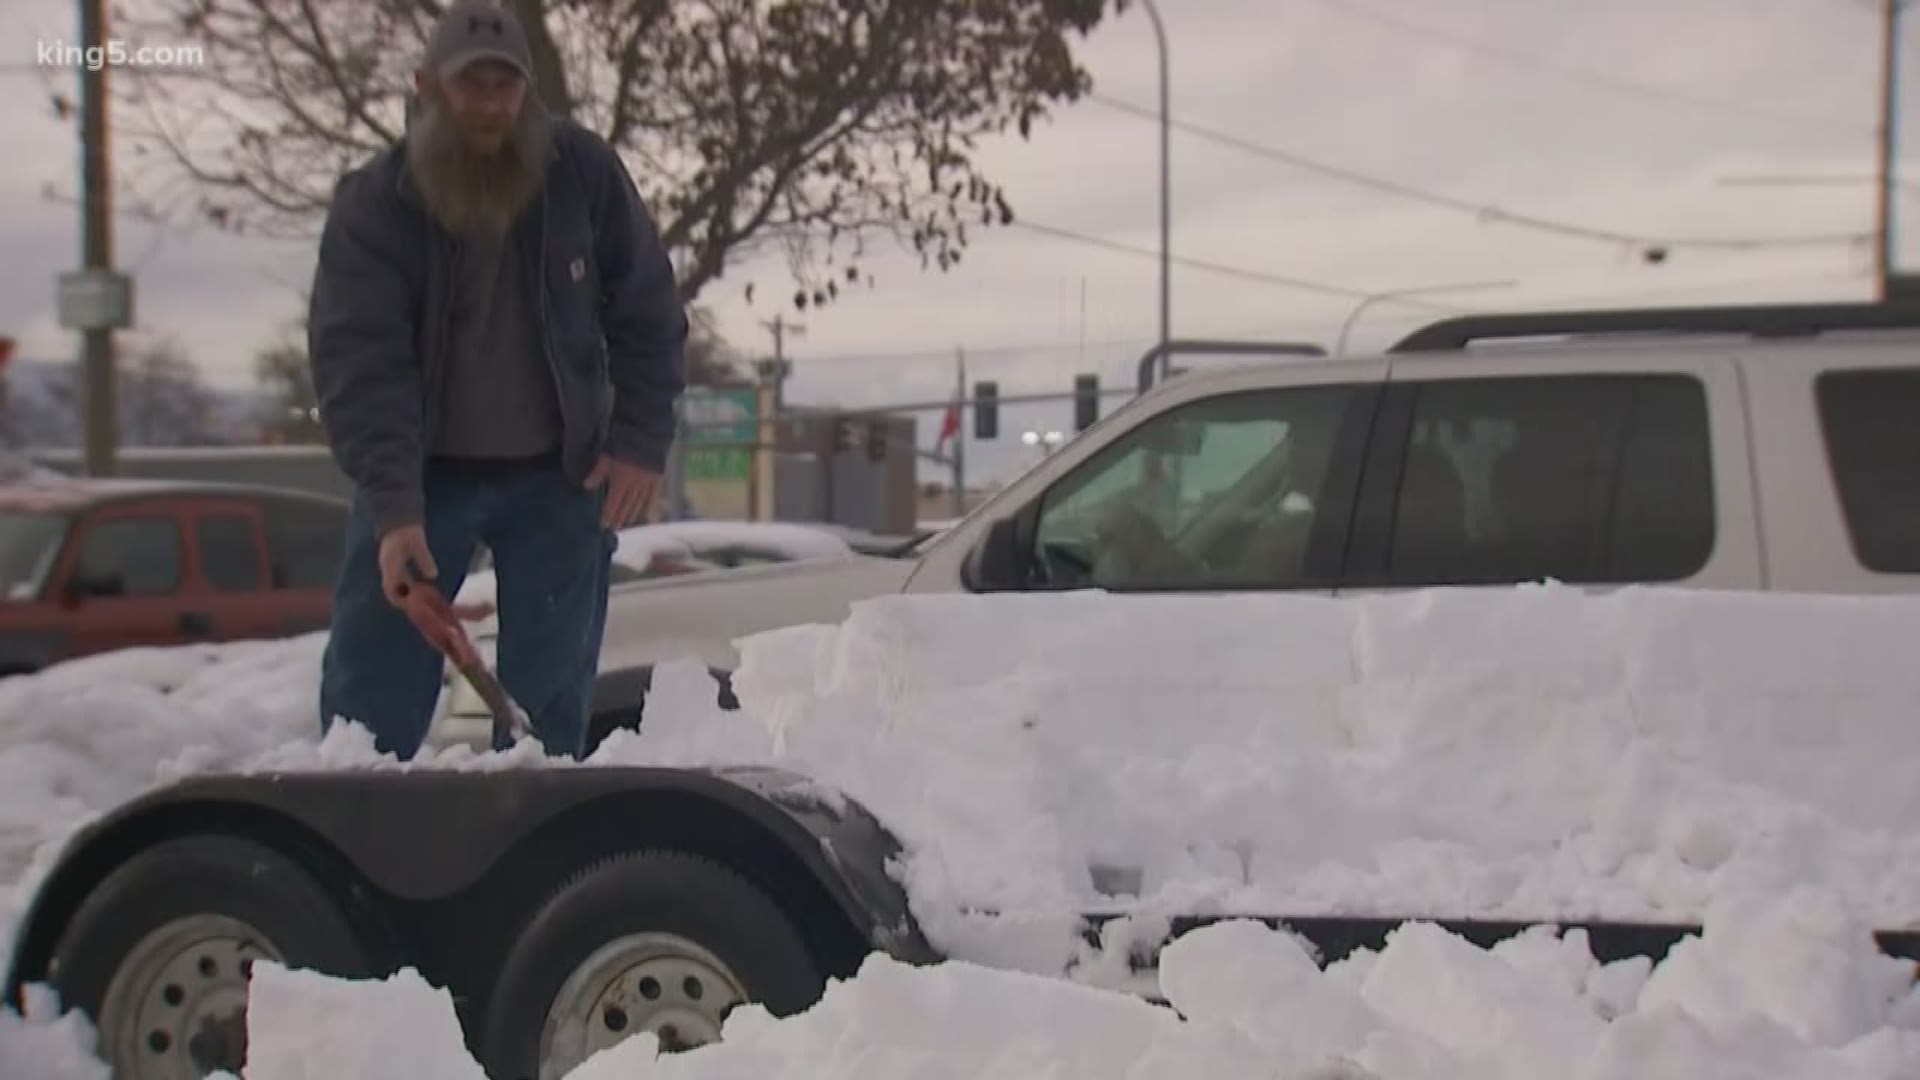 Some people have been stuck in their homes for days. KING 5's Ted Land joins us from Sequim, WA where people are working long hours trying to free their neighbors.